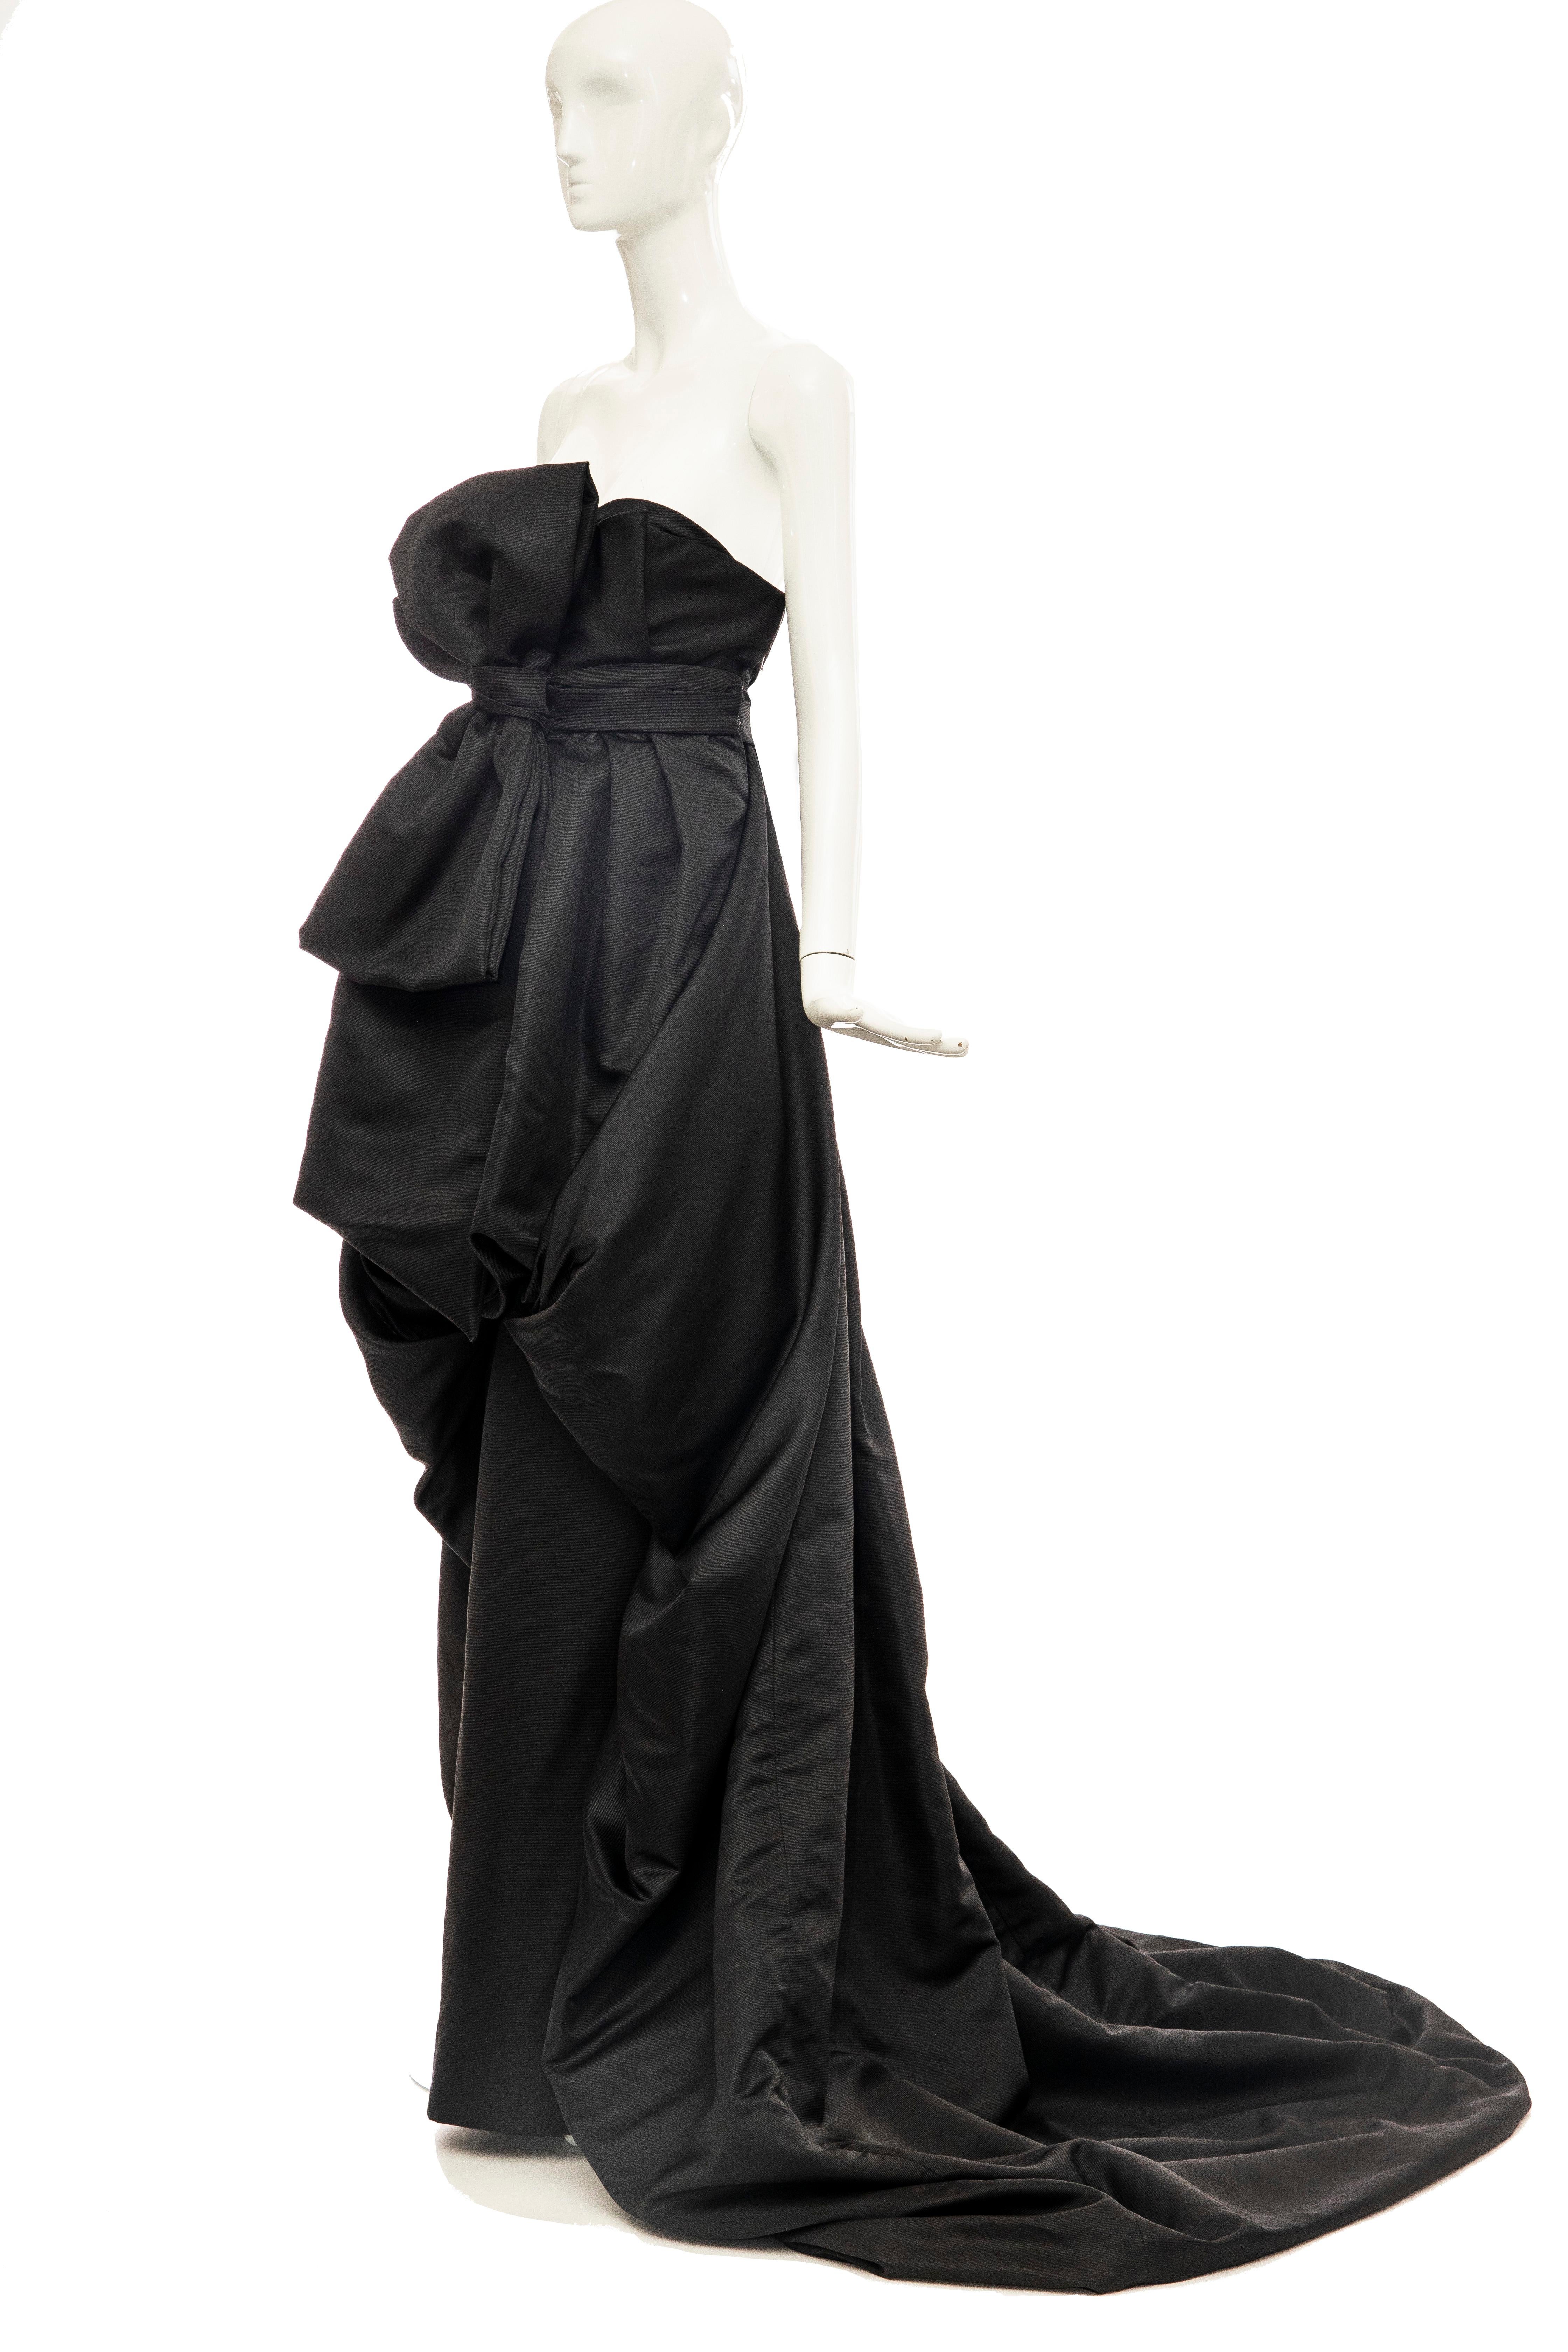 Christian Dior by John Galliano Black Silk Strapless Gown, Fall 2008 For Sale 2